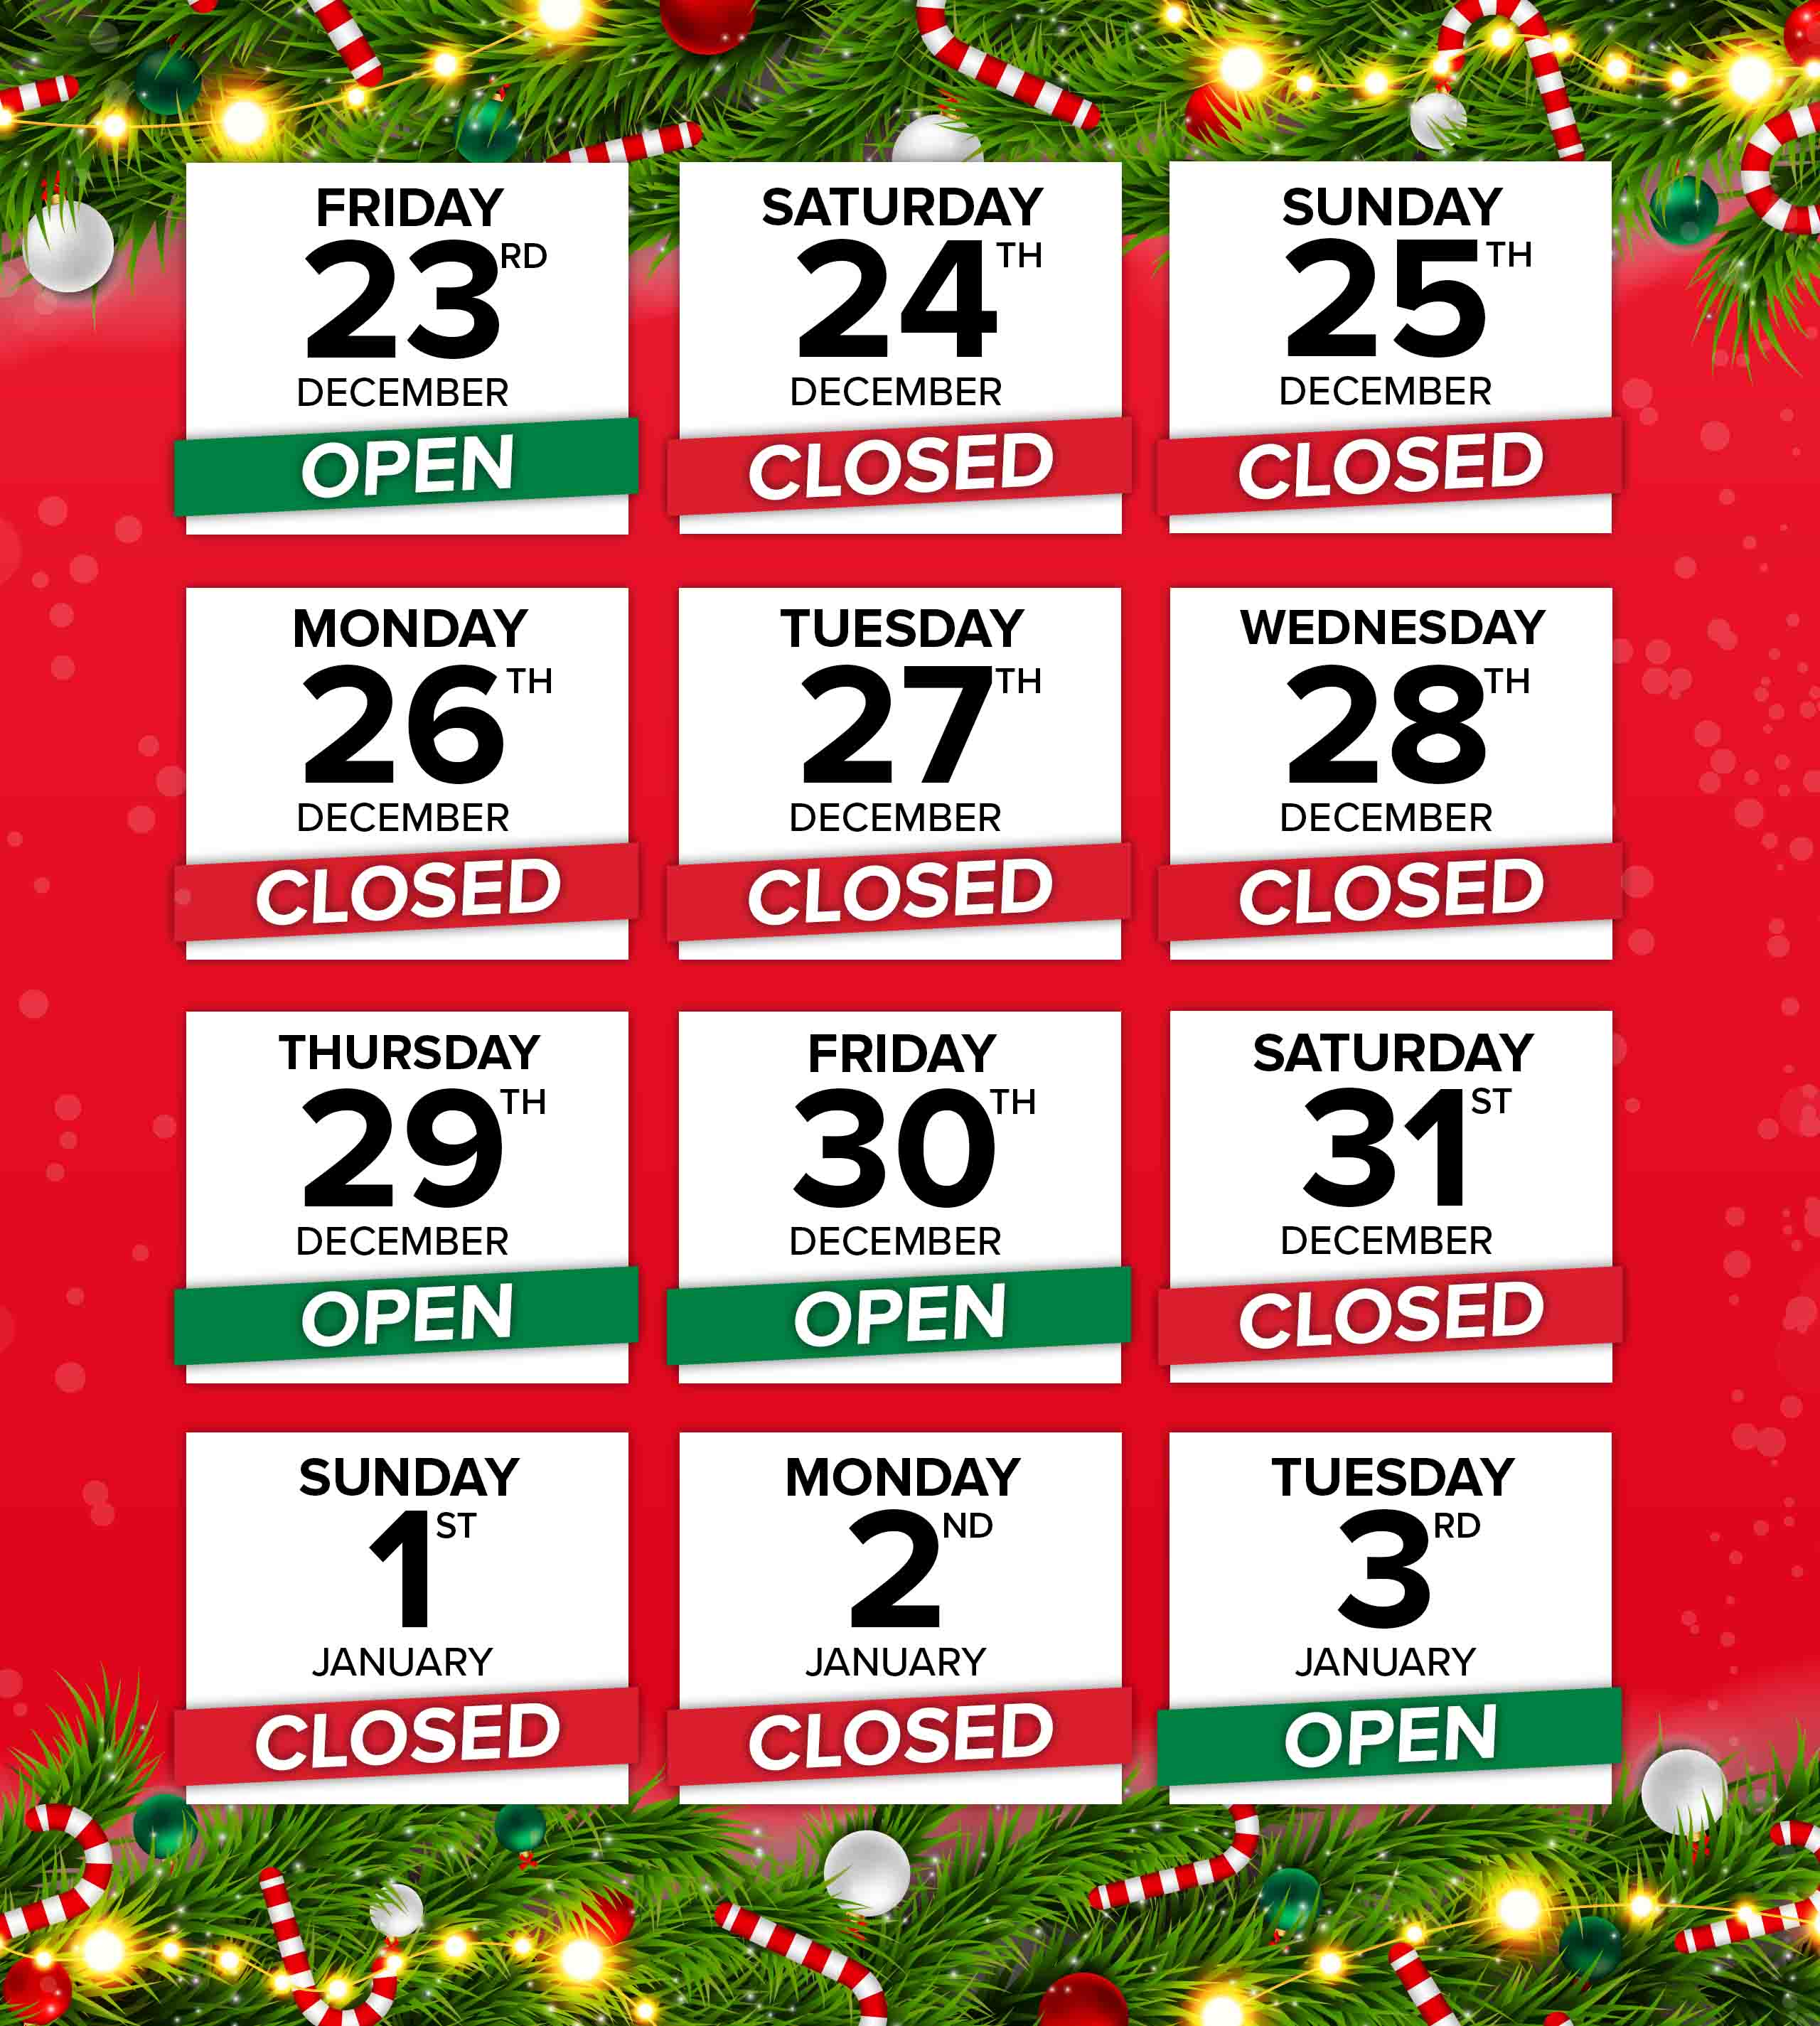 Christmas and new year opening hours for Maidstone Honda and all Laguna stores, 2022 - 2023.